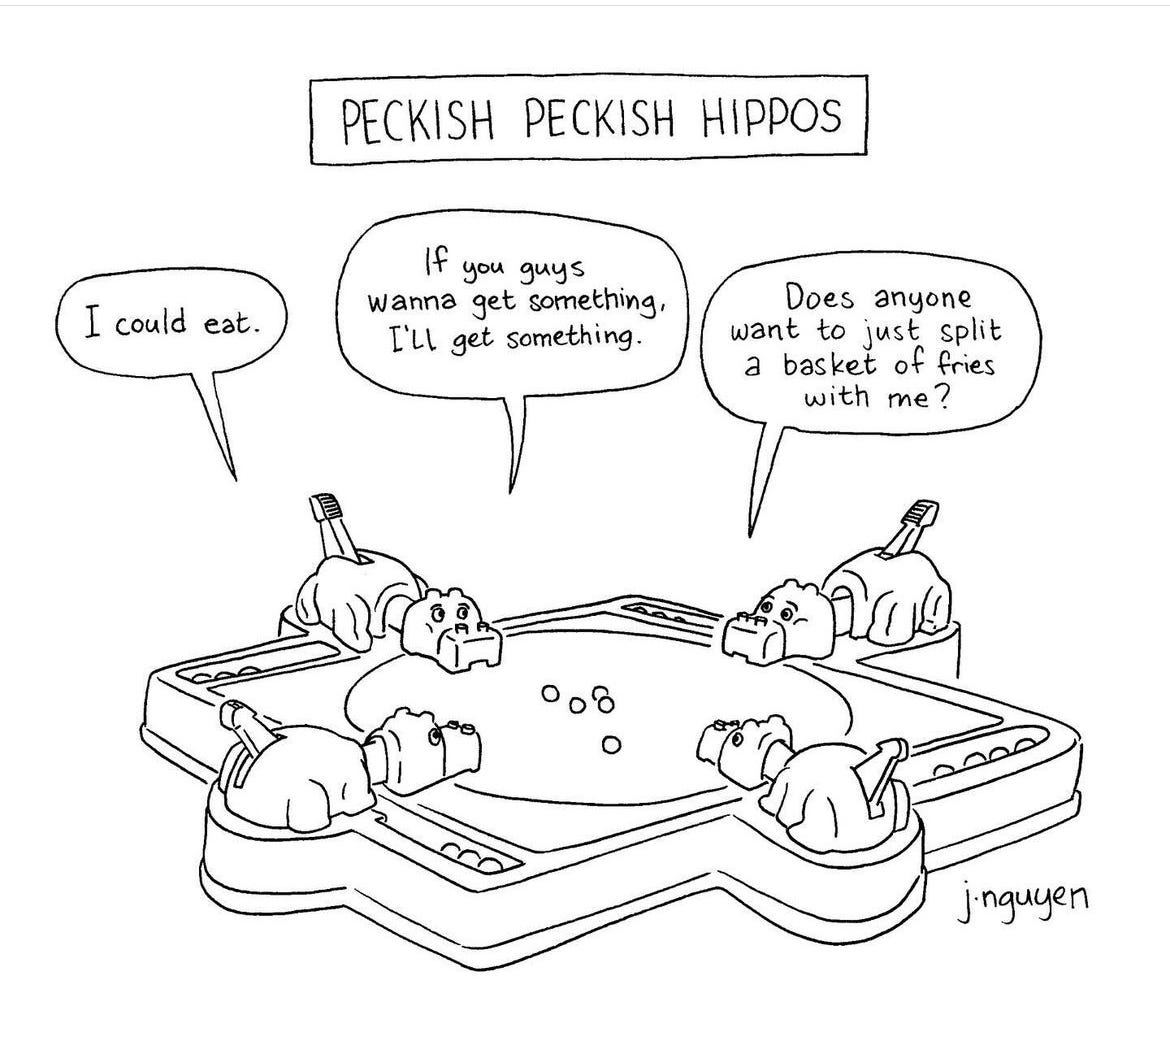 cartoon of hungry hungry hippos game titled peckish peckish hippos with the hippos talking about eating